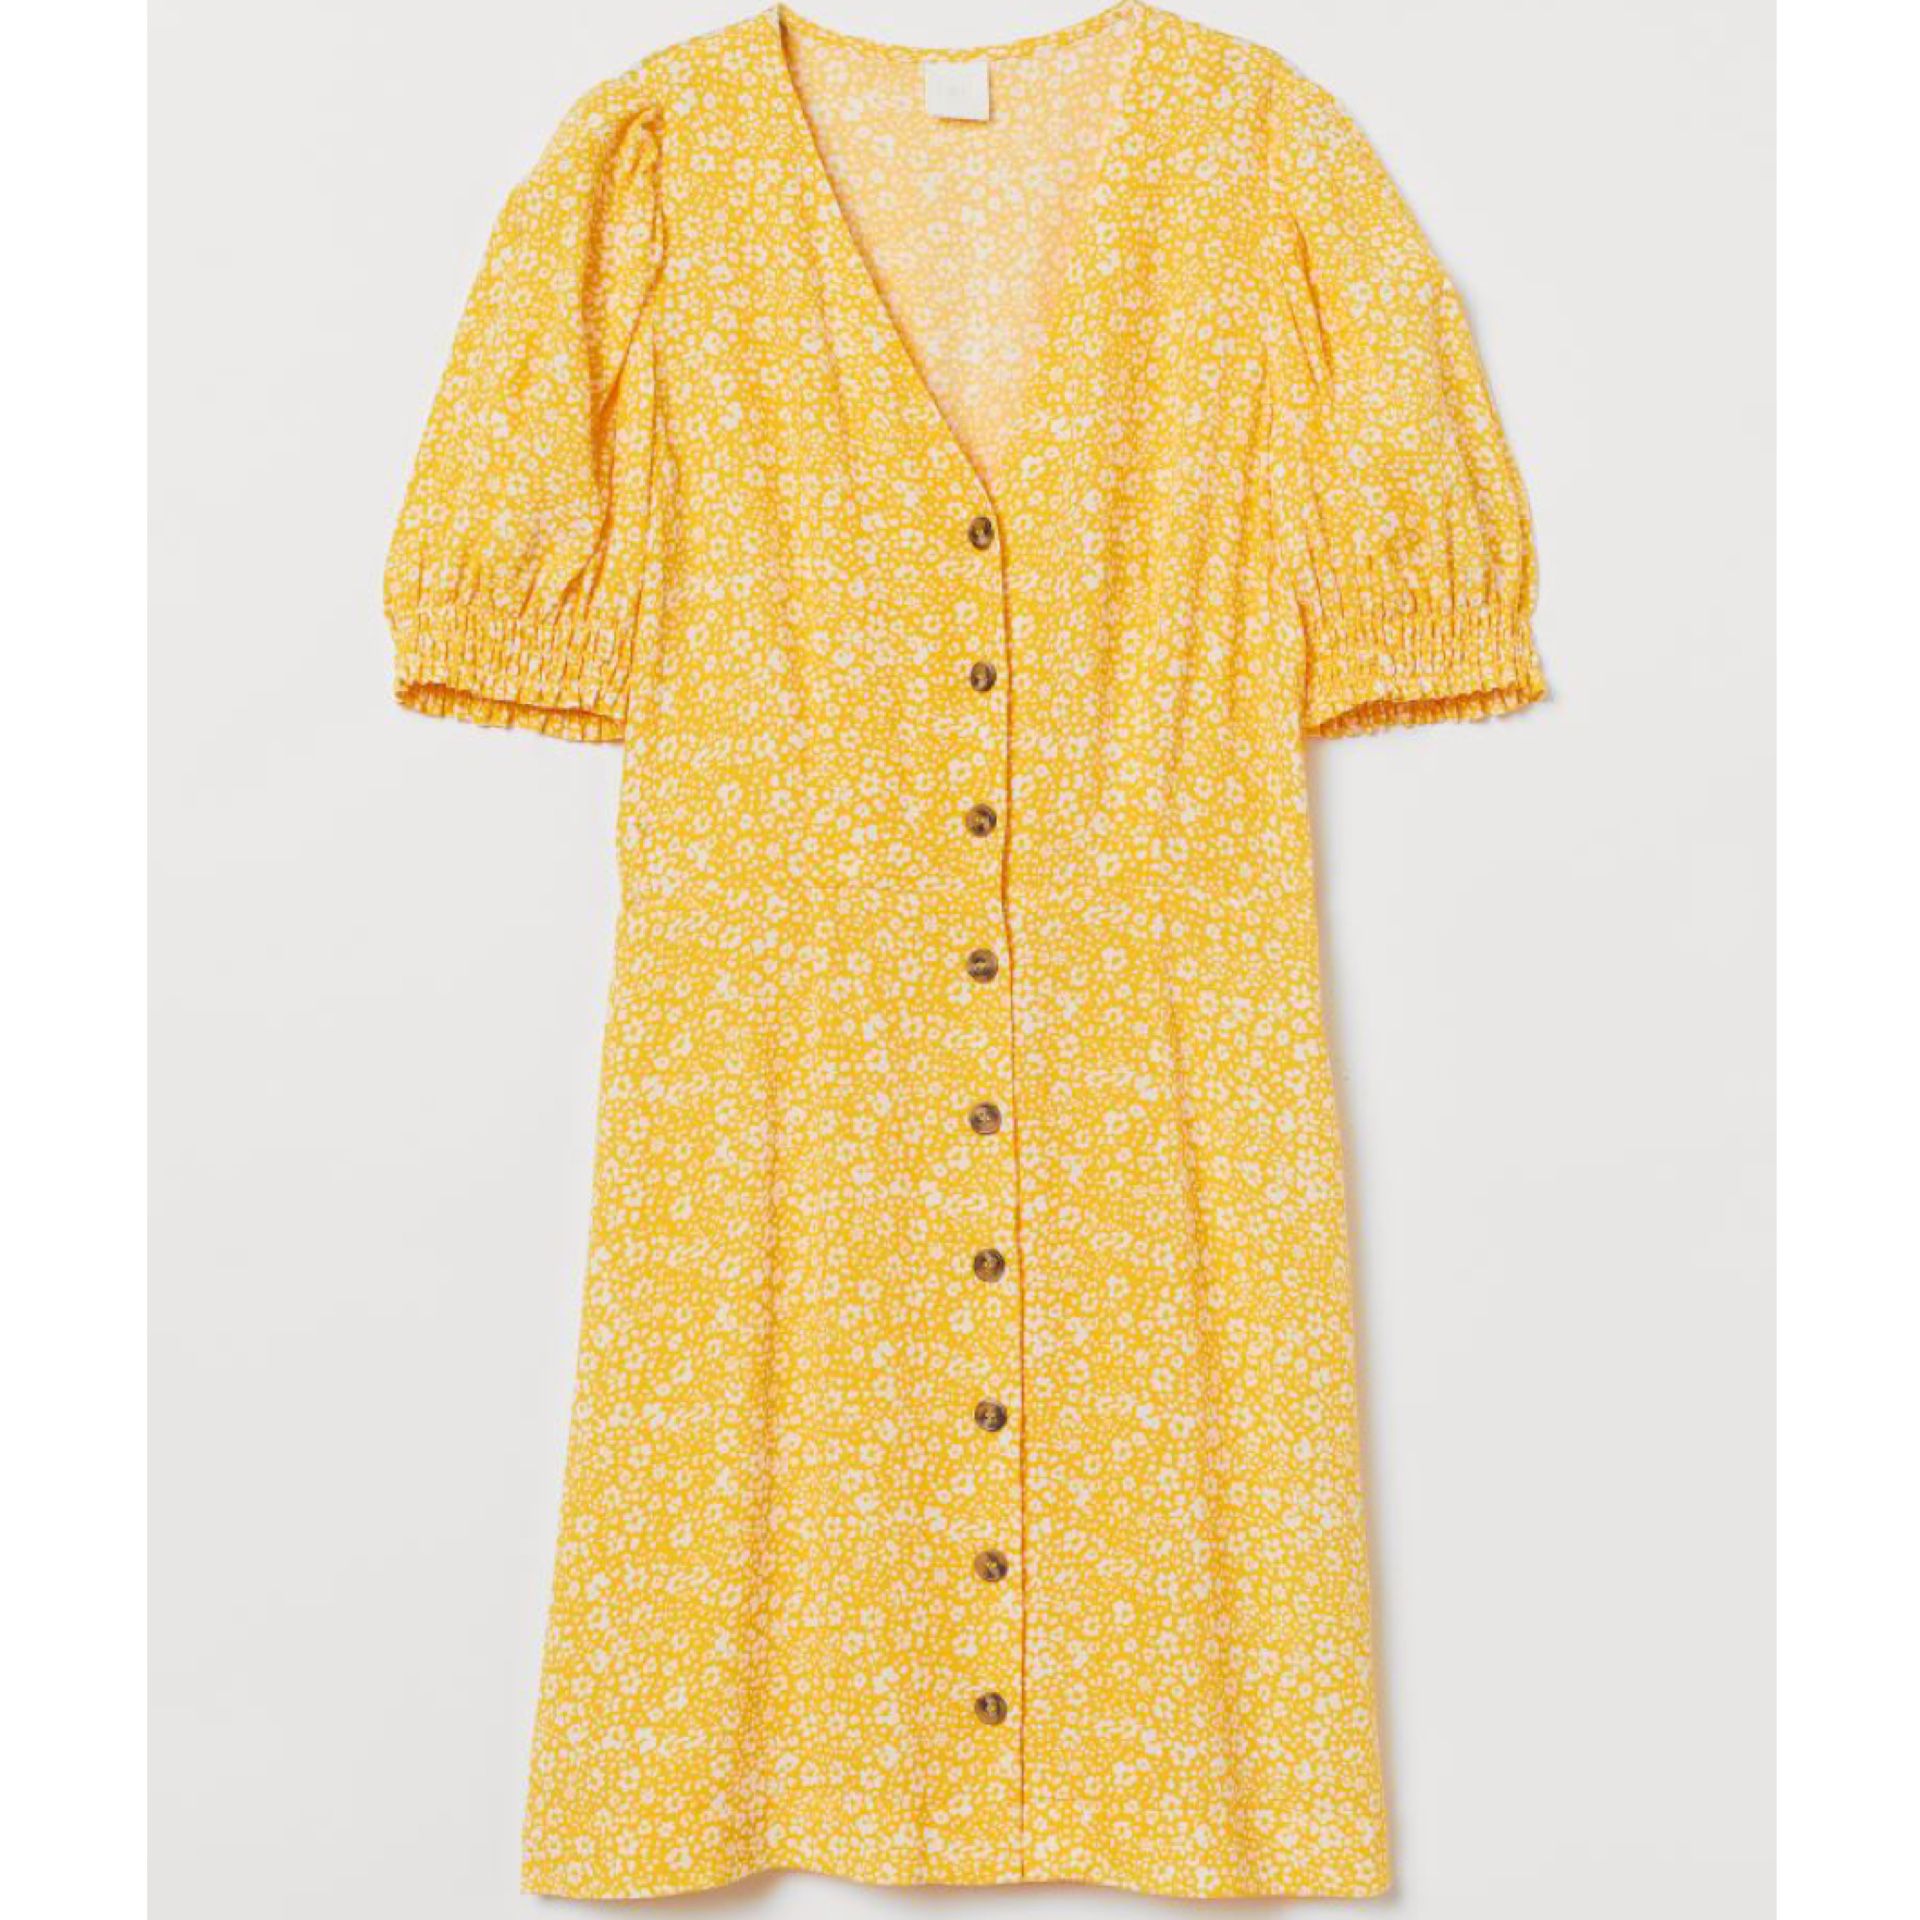 WORN 1X H&M Yellow Floral Woven Puff Sleeve Dress